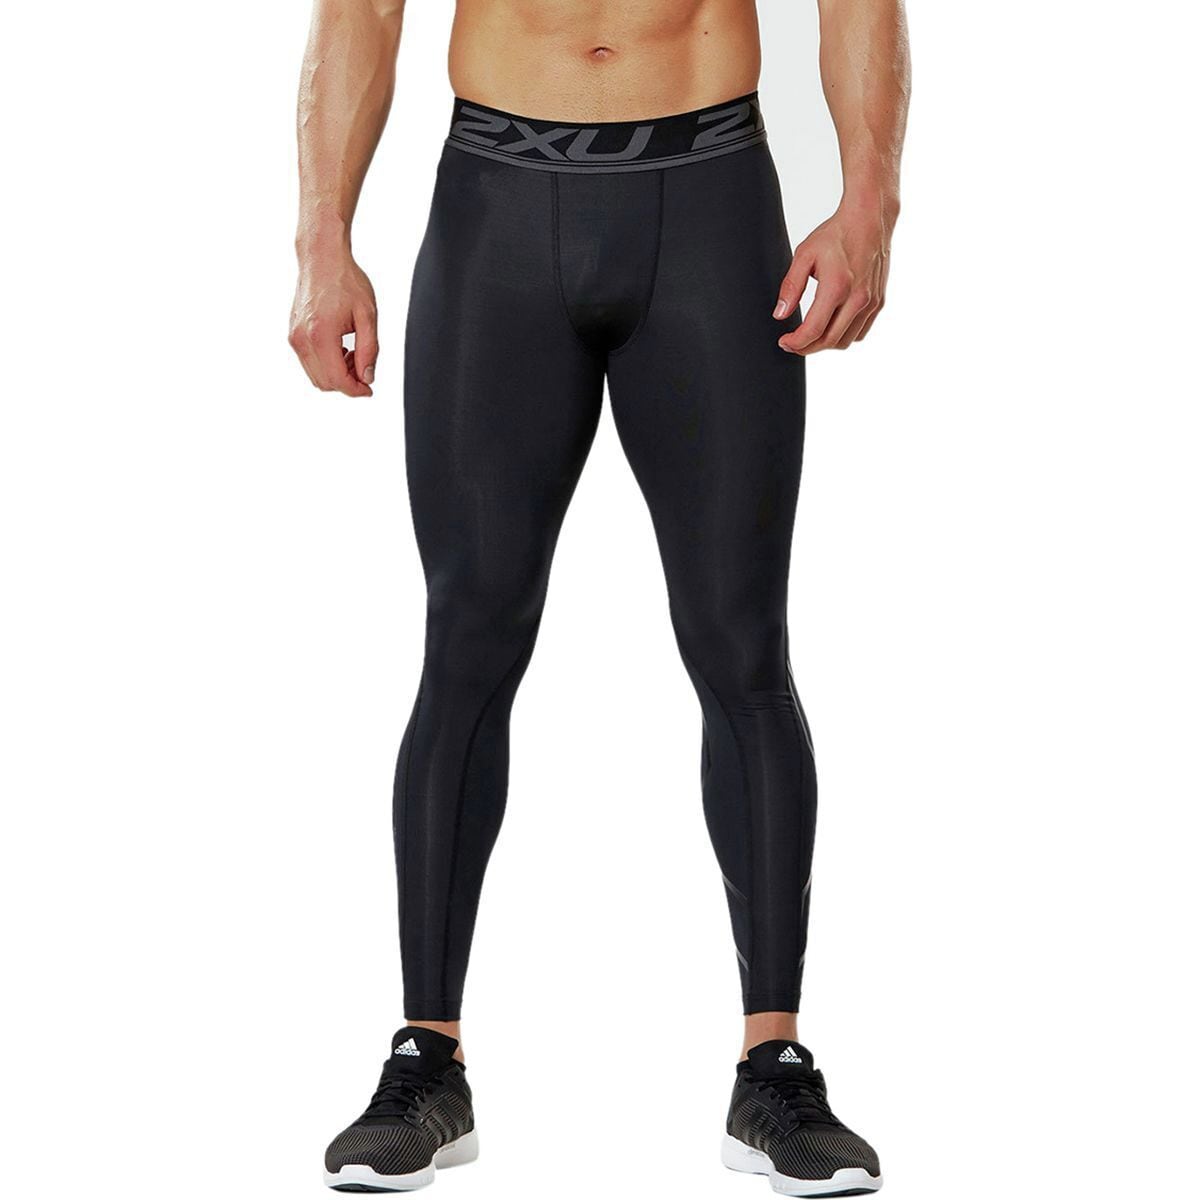 2XU Accelerate Compression Tights - Men's | Backcountry.com